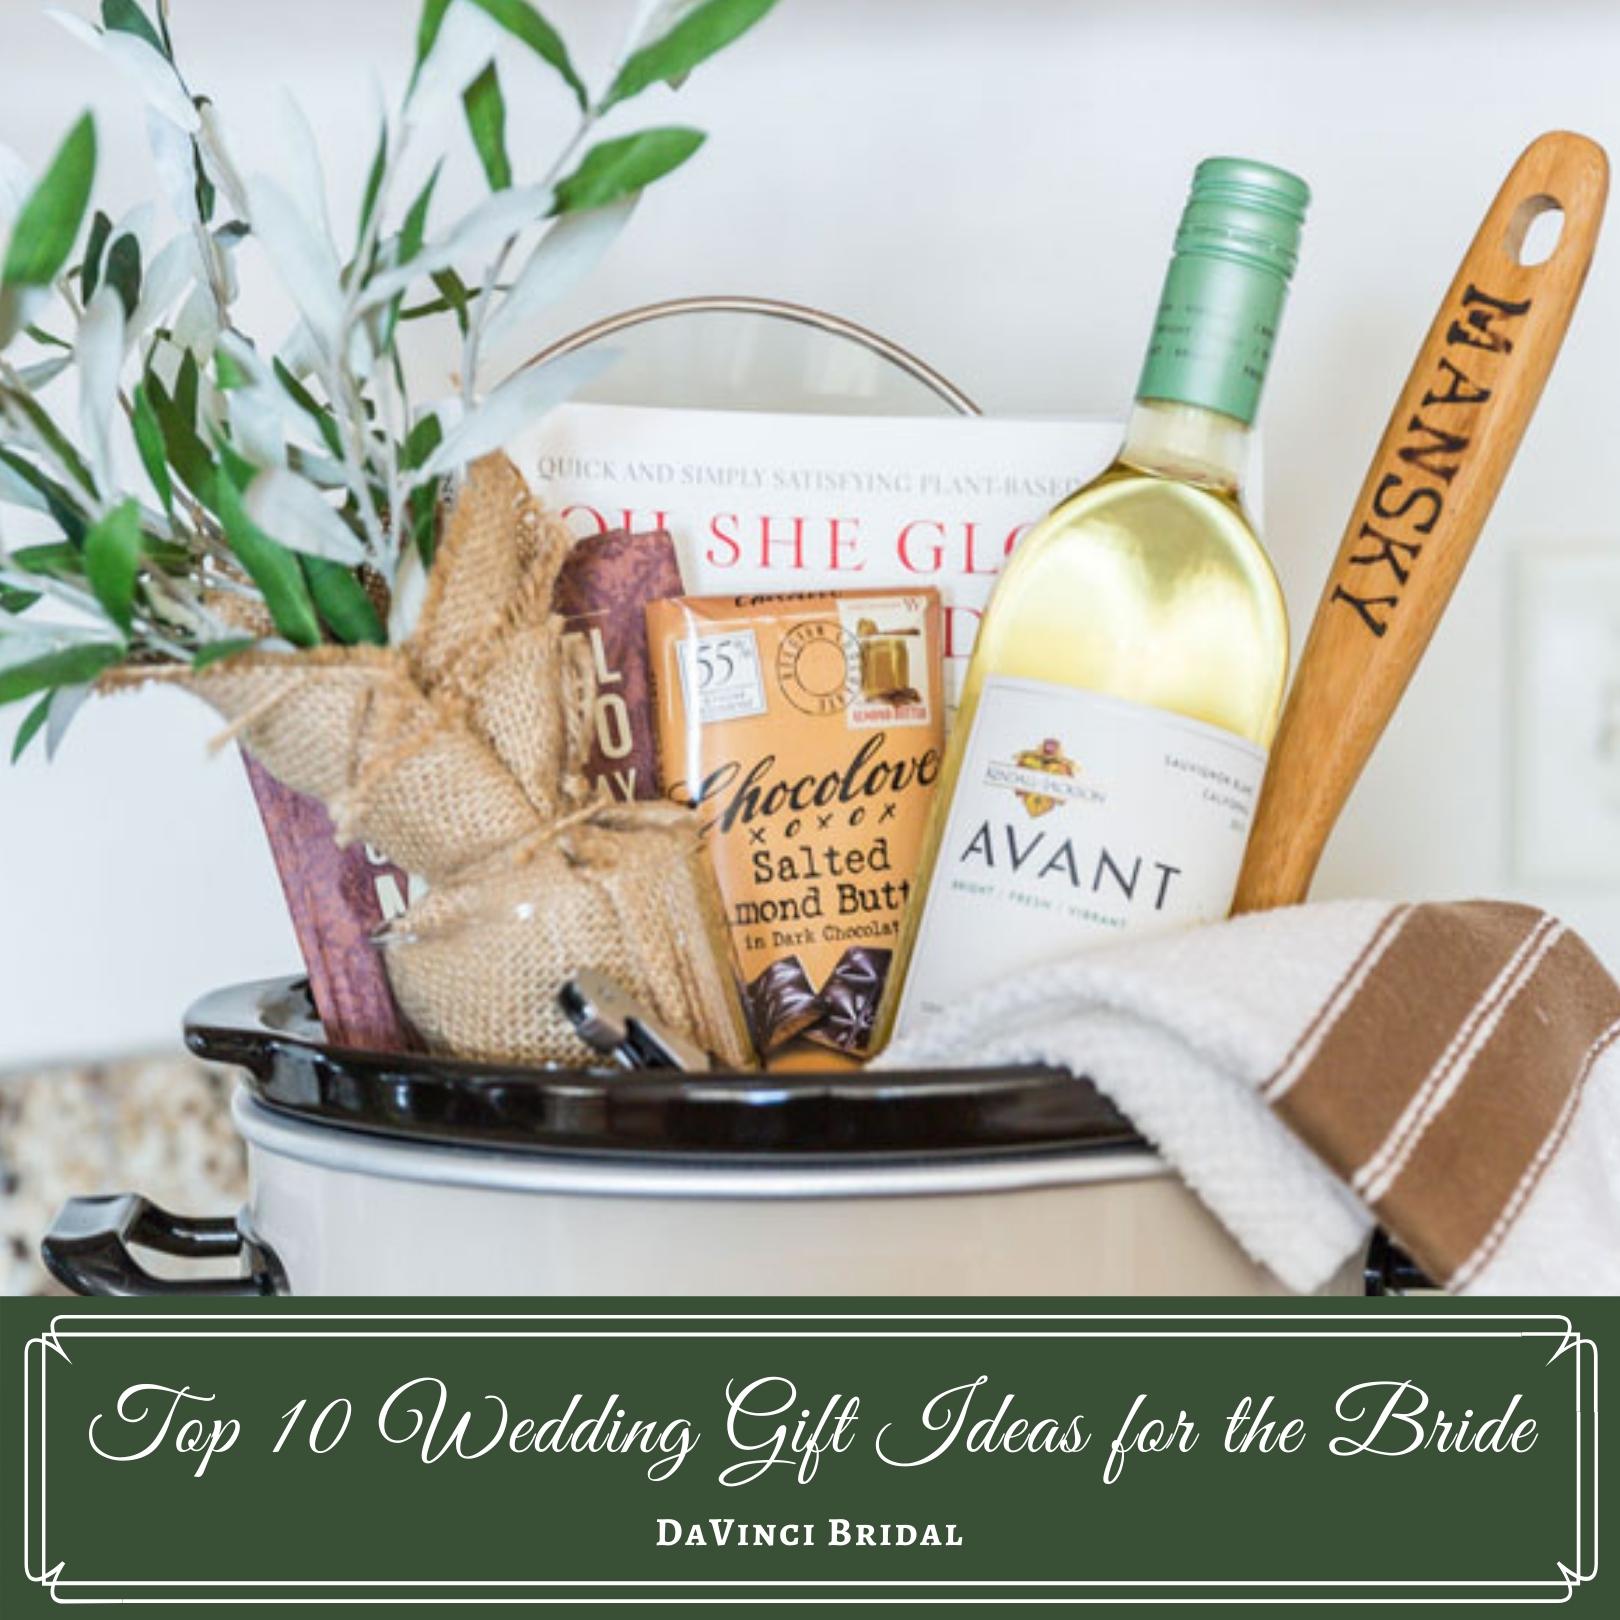 Top 10 Wedding Gift Ideas for the Bride